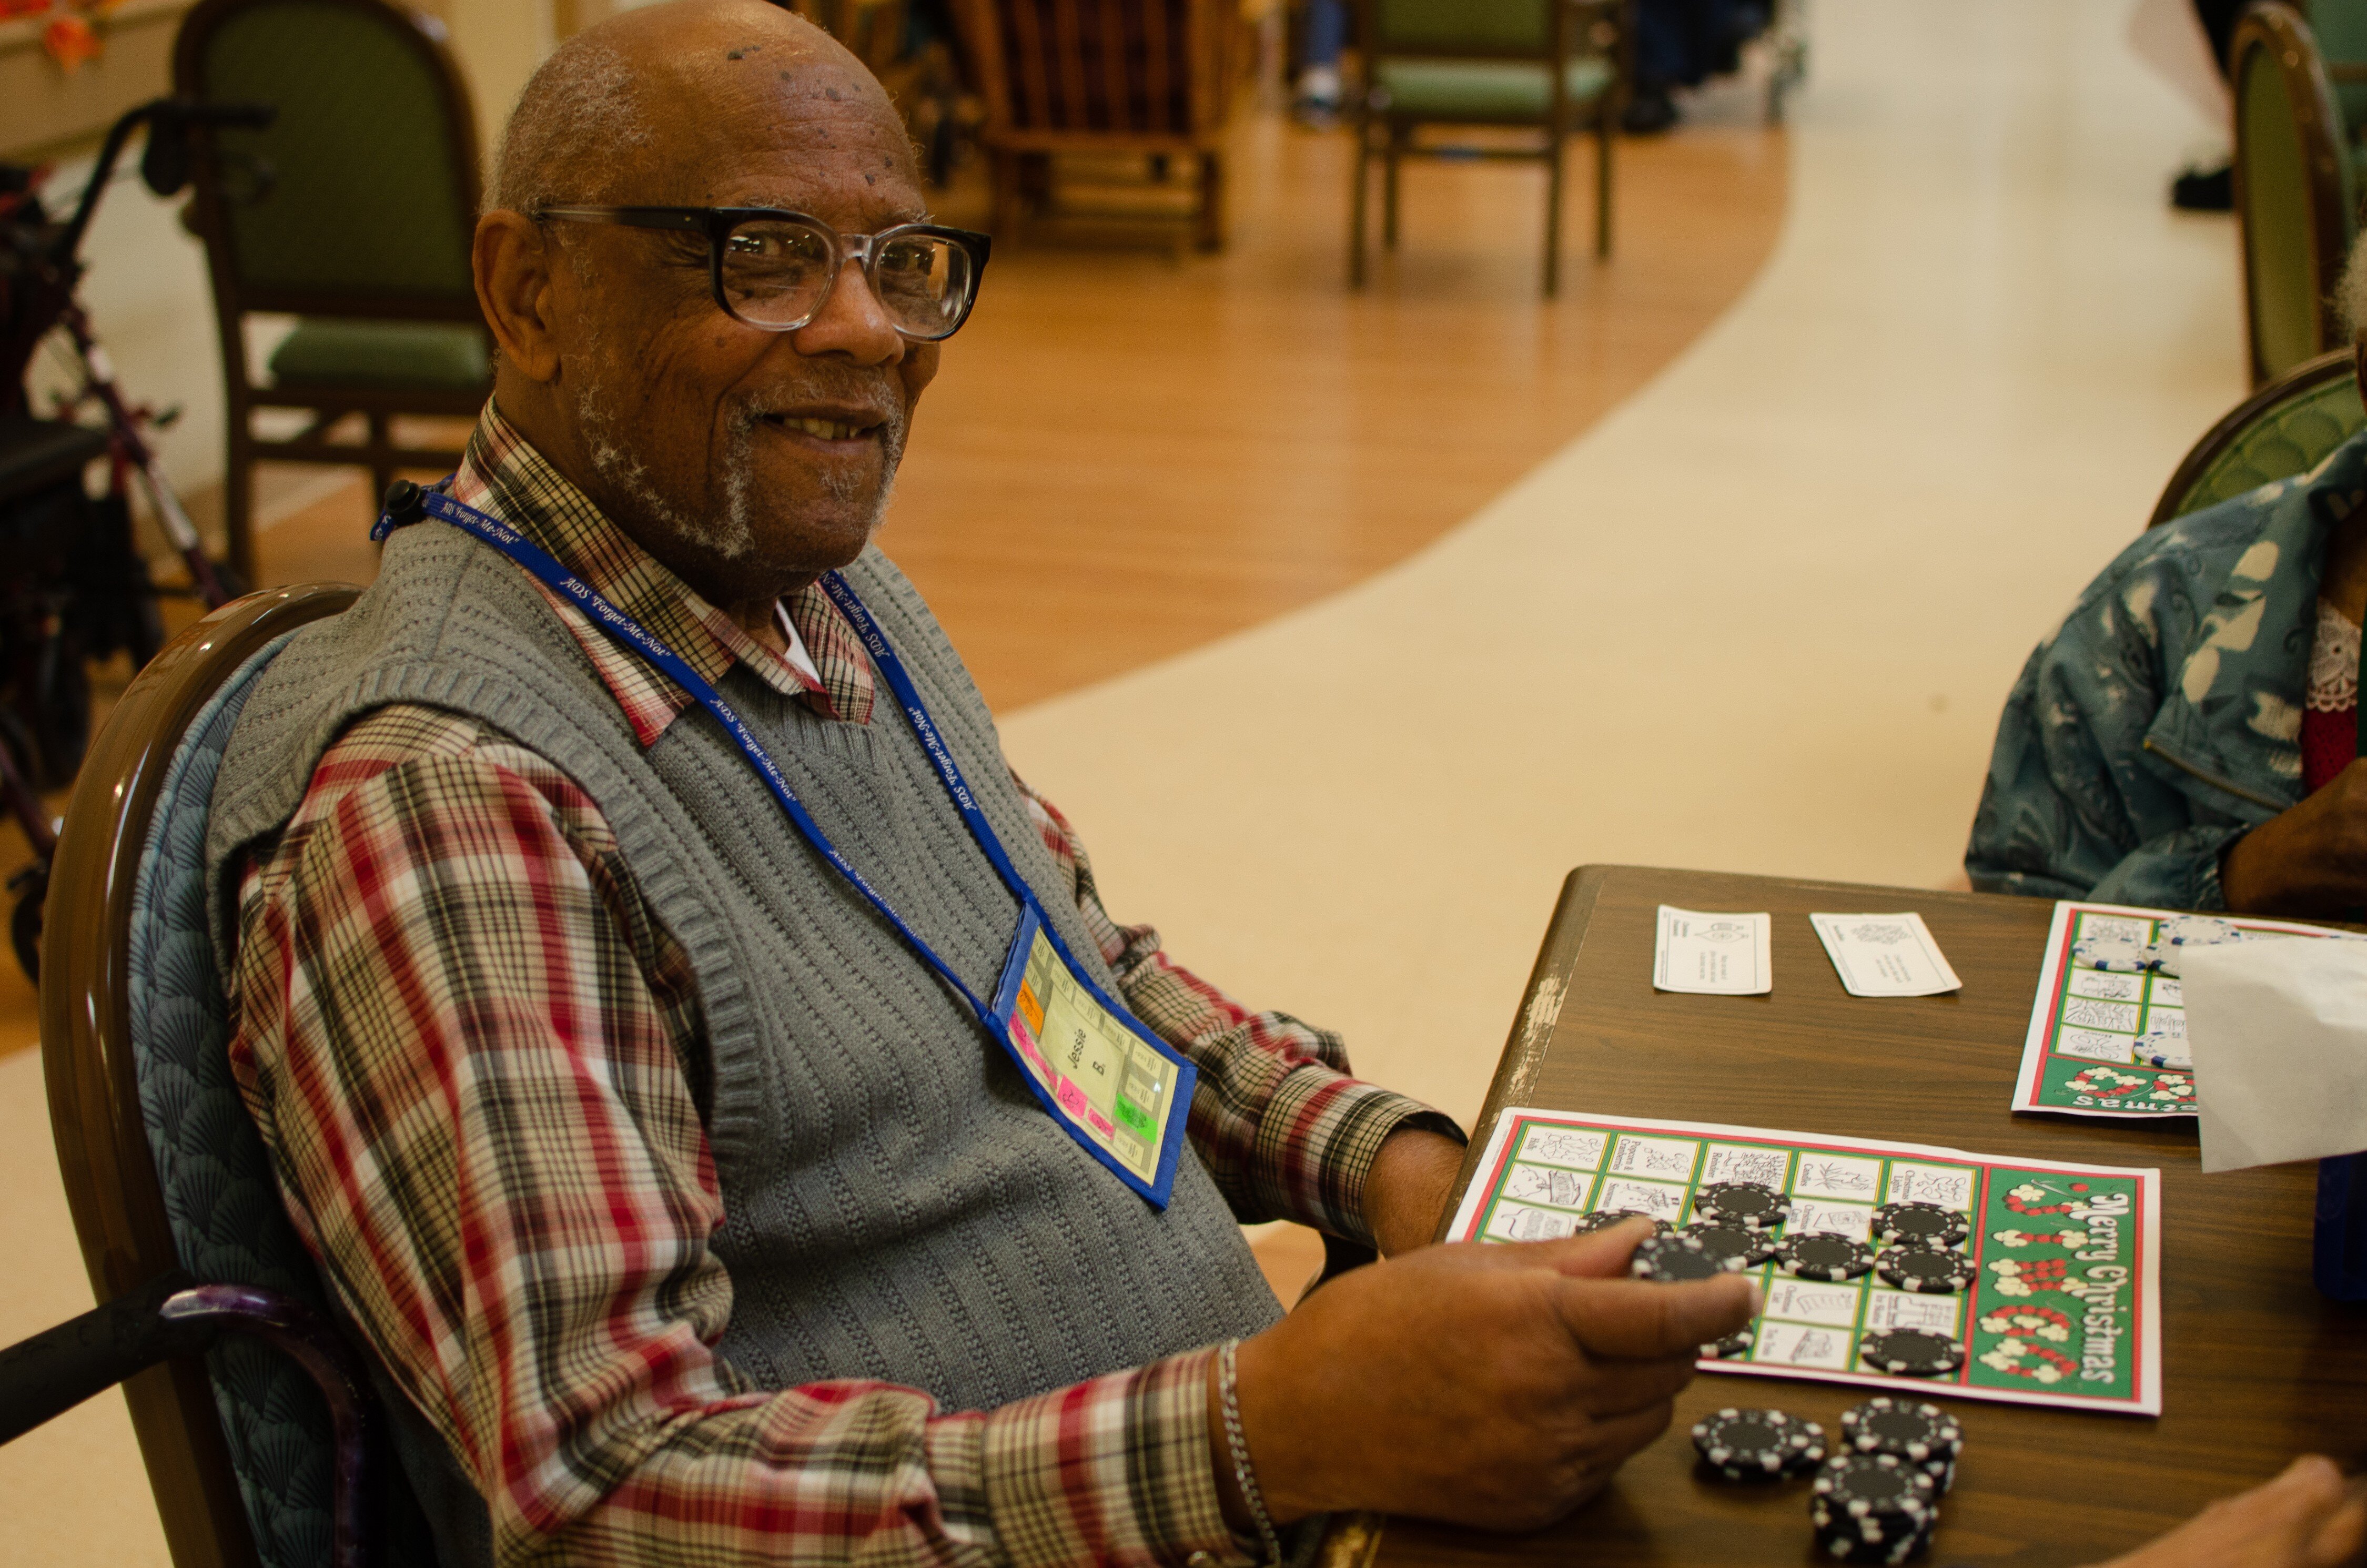 Jessie plays a Christmas-themed BINGO-style game at Dorothy's Place. Dorothy's Place offers a host of activities for Alzheimer's and dementia patients like Jessie. (Cat Evans)